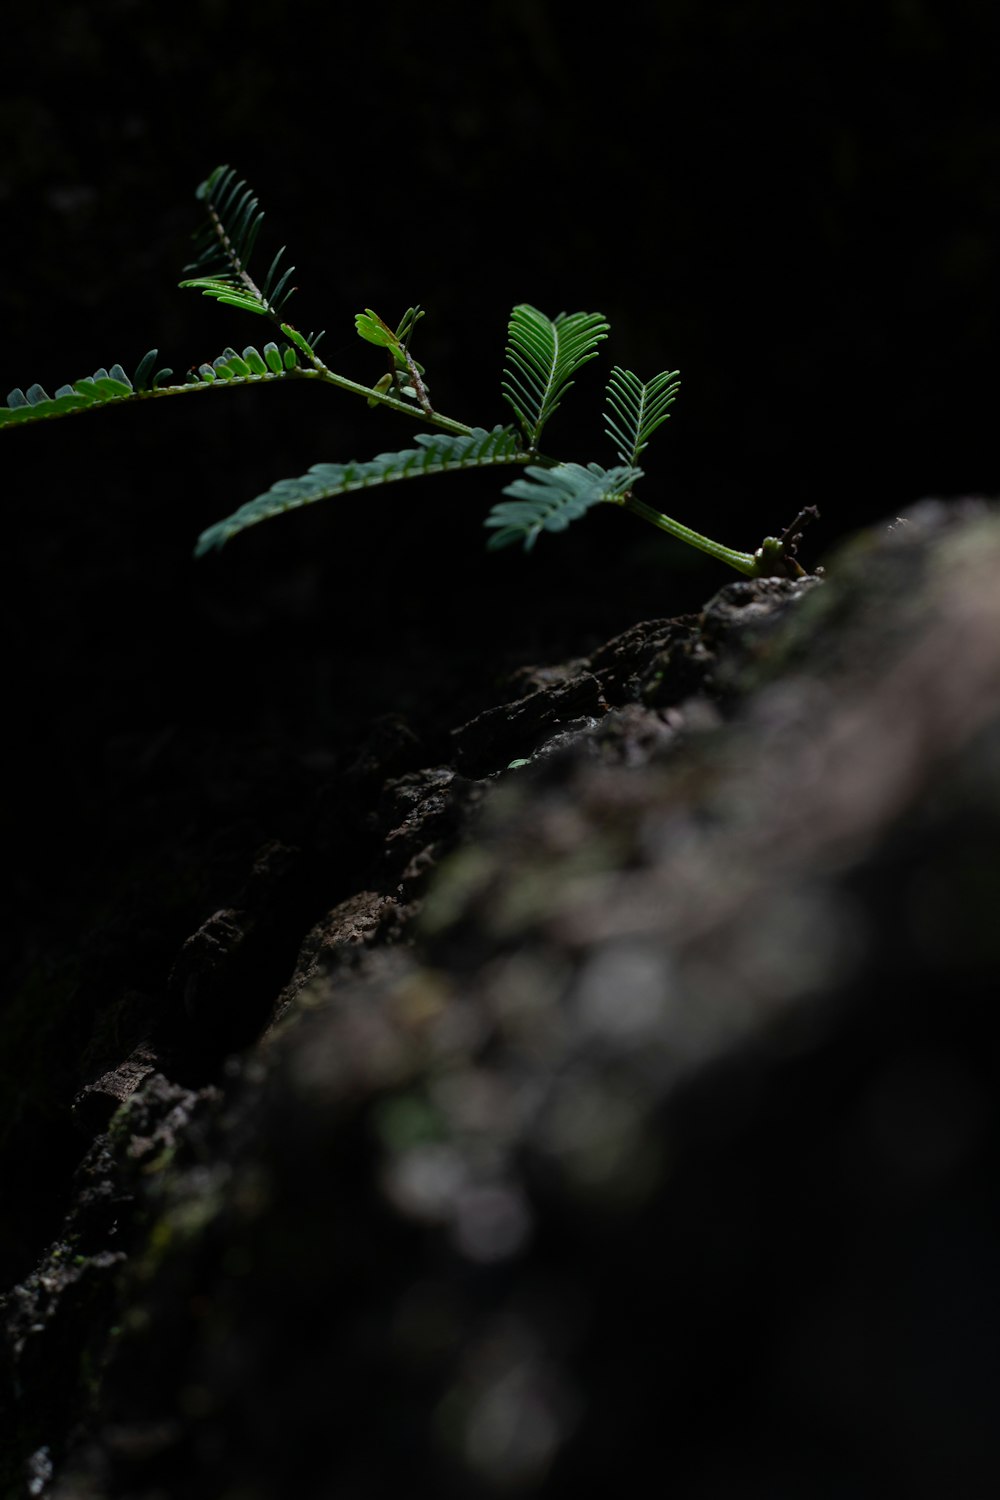 green plant on brown rock